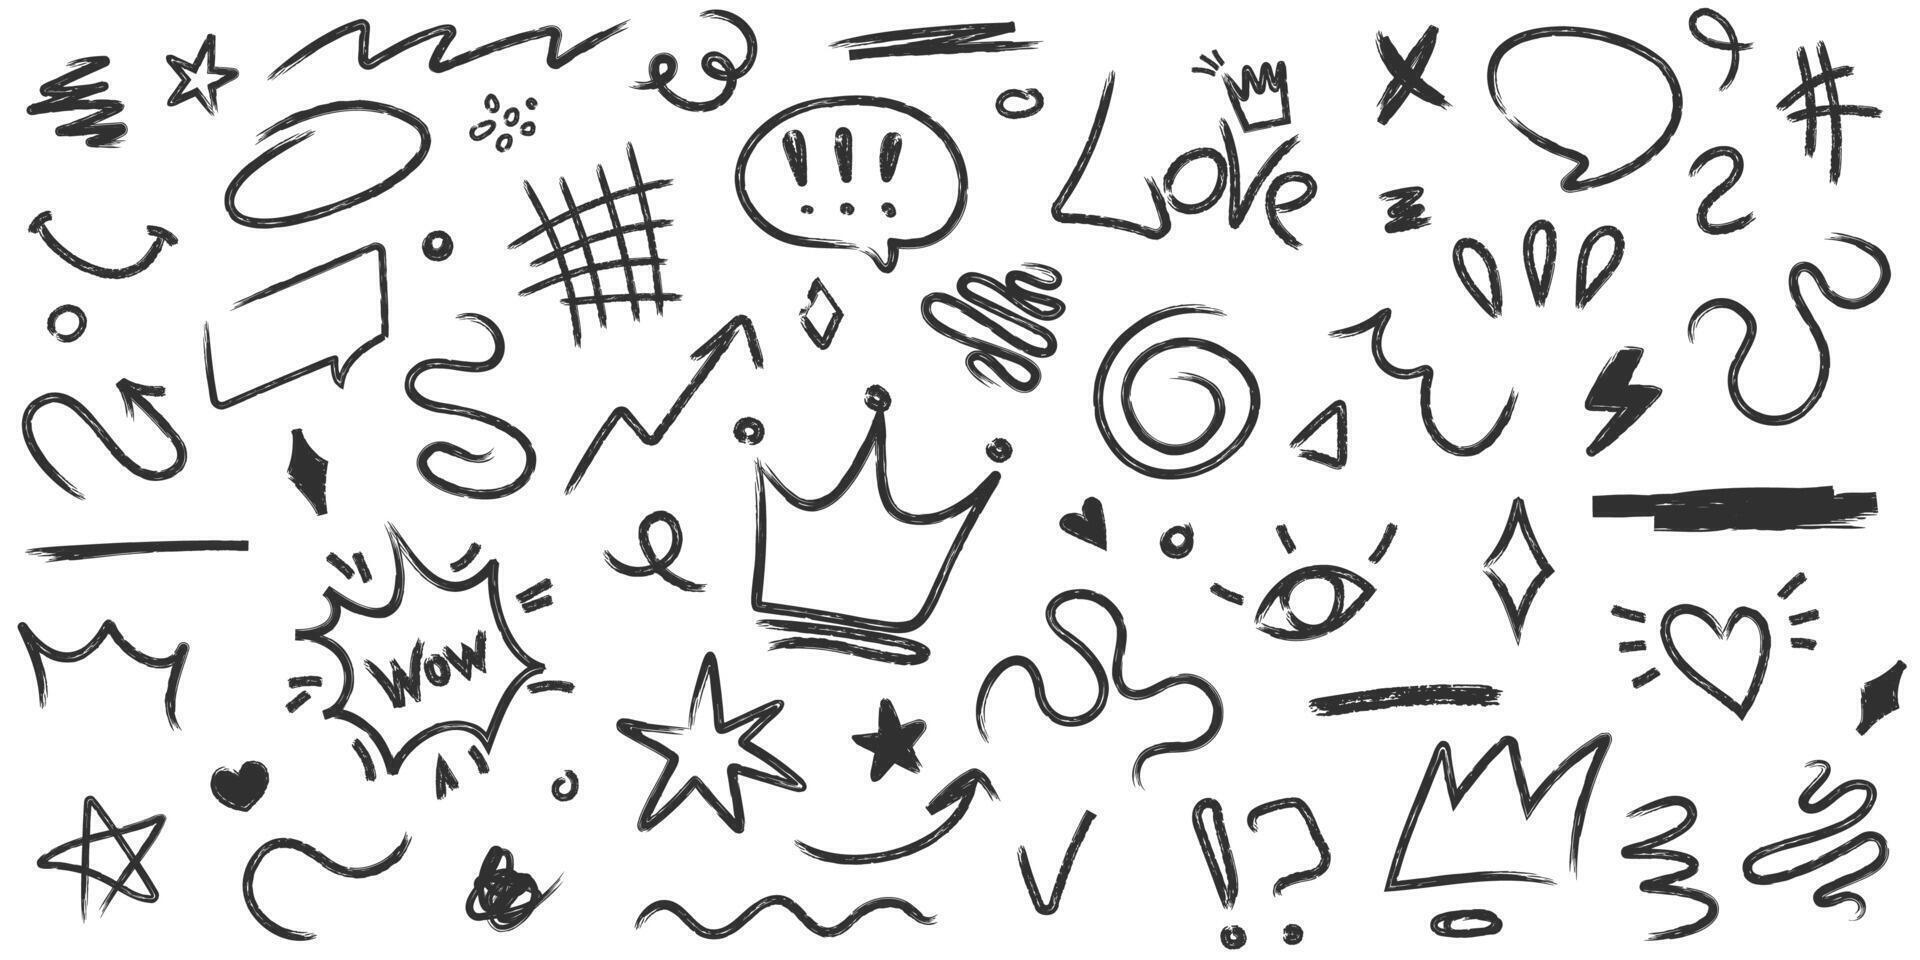 Hand drawn graffiti squiggles. Doodle scribbles, curved lines and symbols set vector